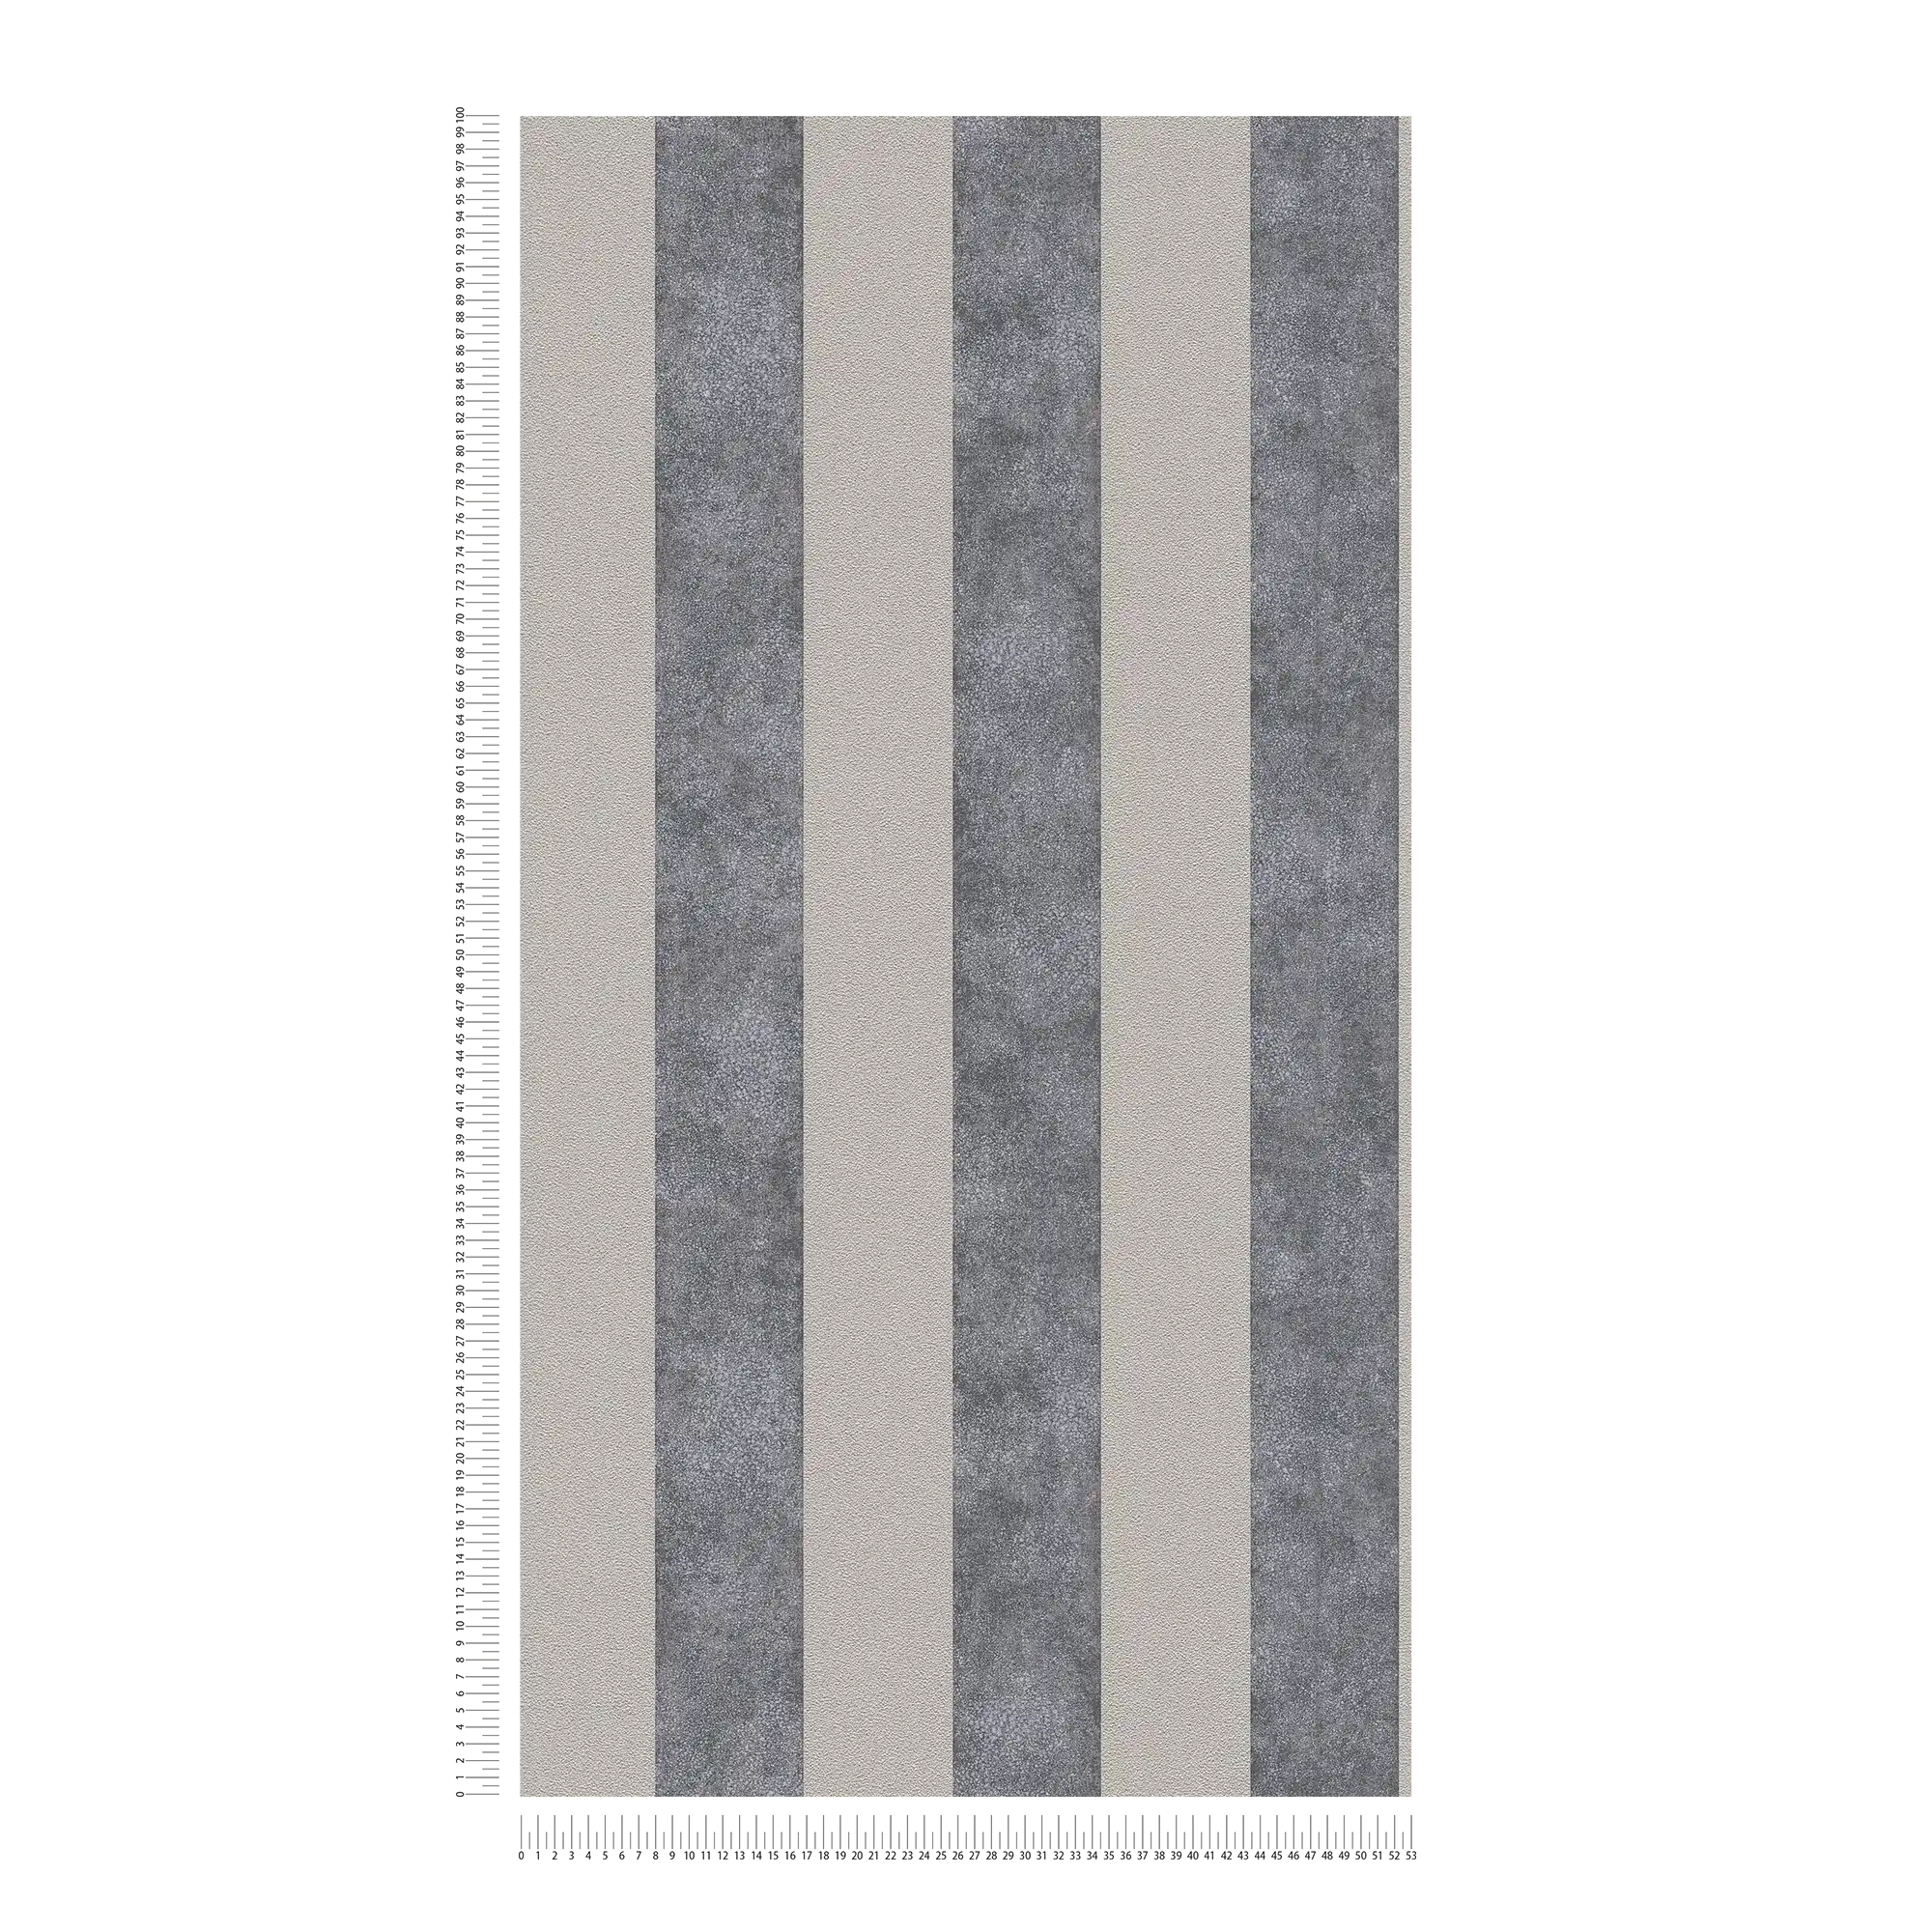             Block stripes wallpaper with colour and texture pattern - black, grey, beige
        